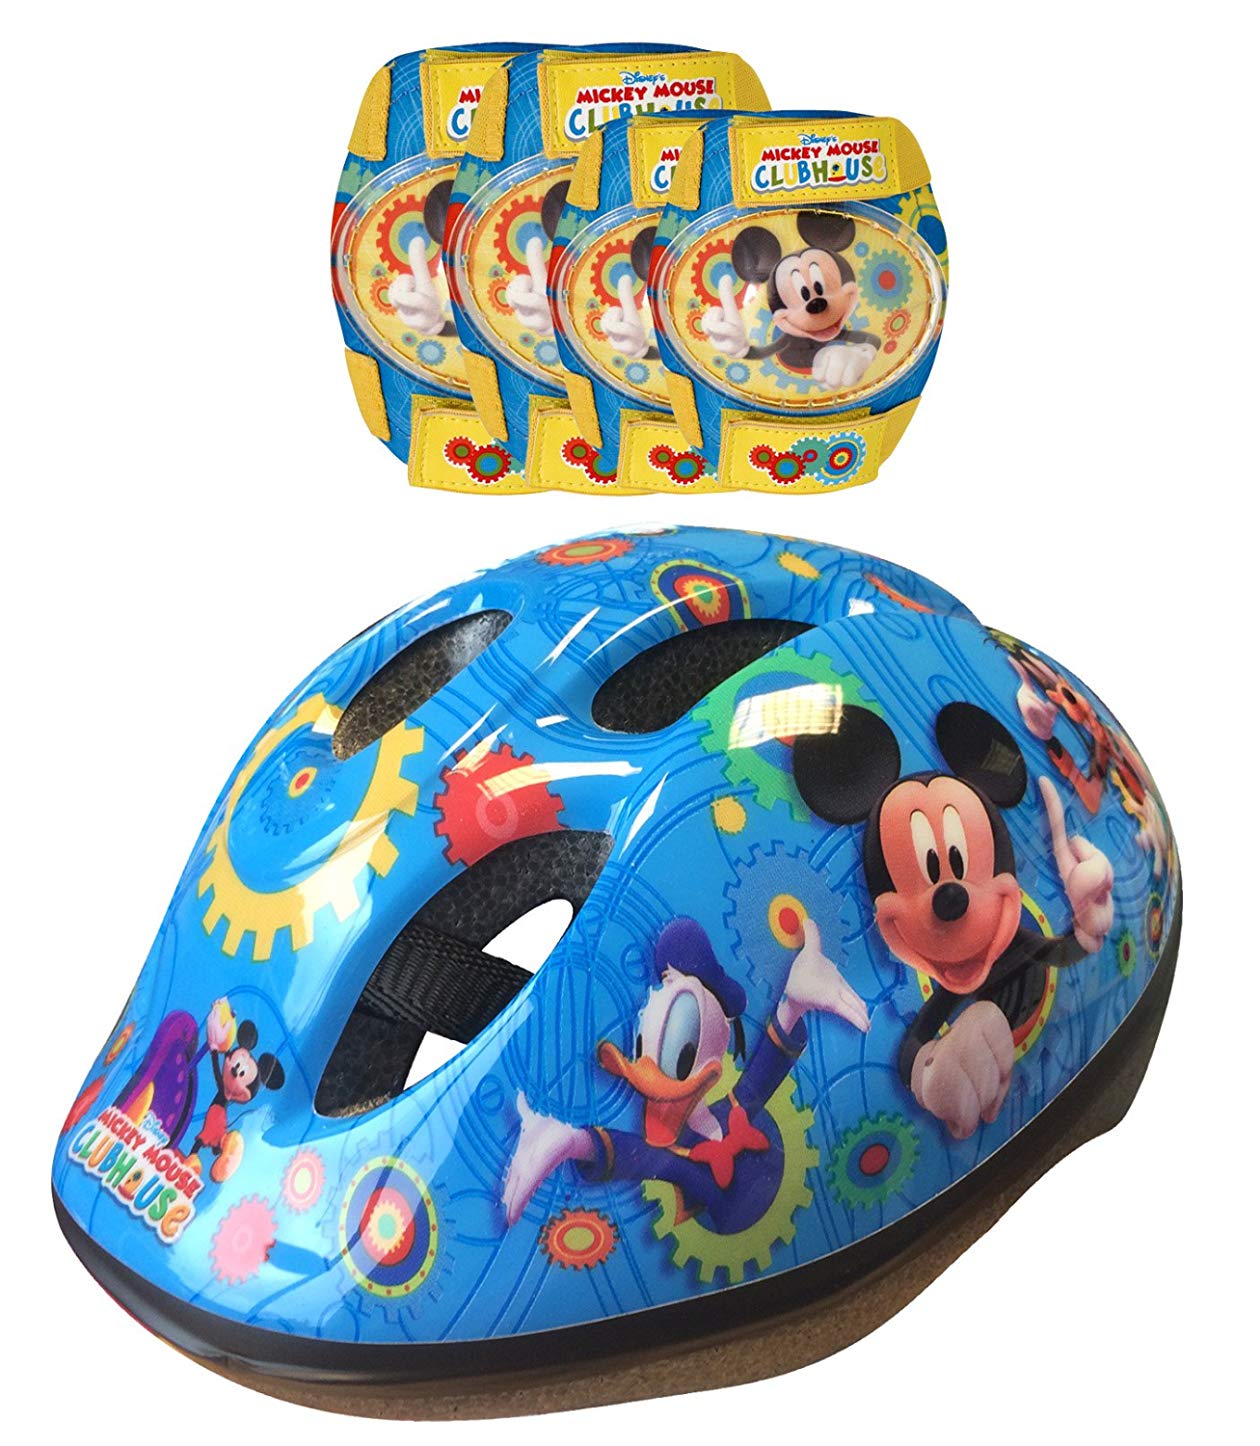 Helmet and Elbow Pads Stamp Disney Mickey Mouse Knee Pads